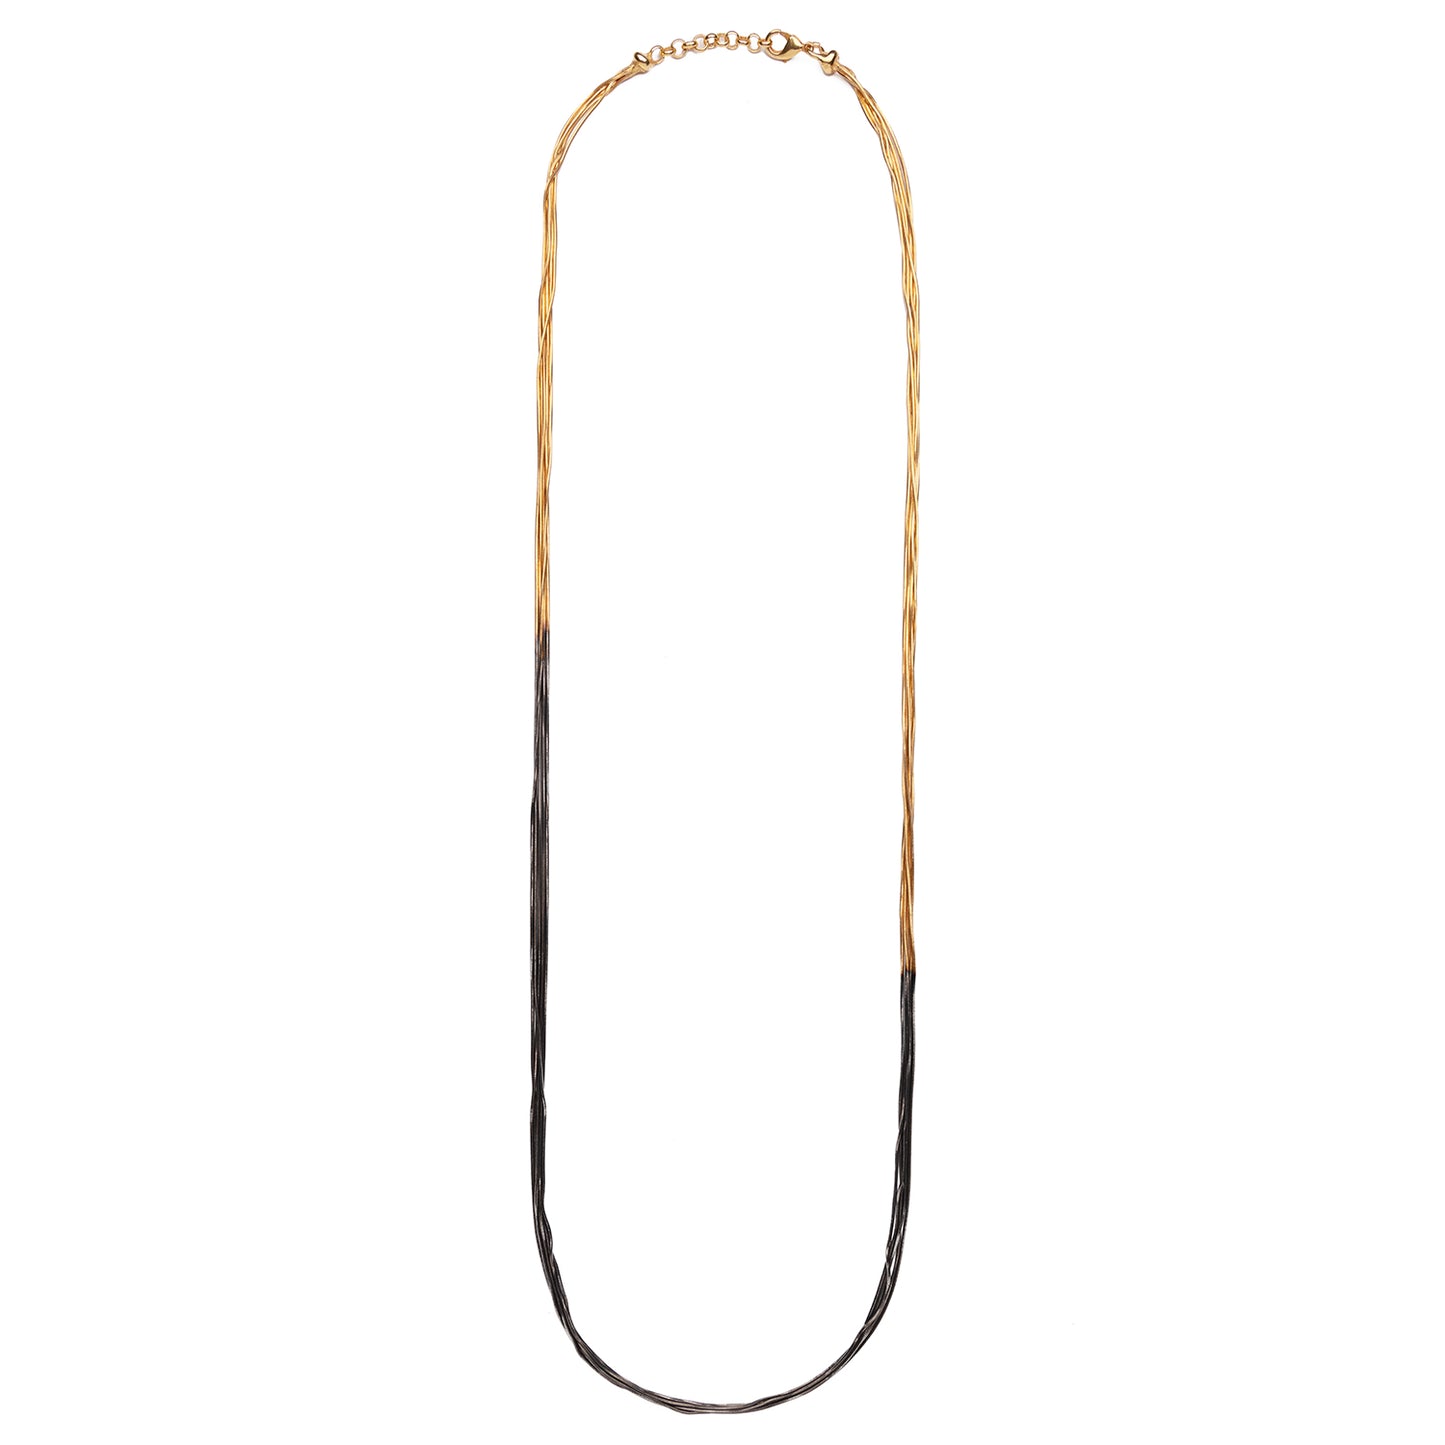 Iosselliani C945/21 SS 5 Wires long necklace